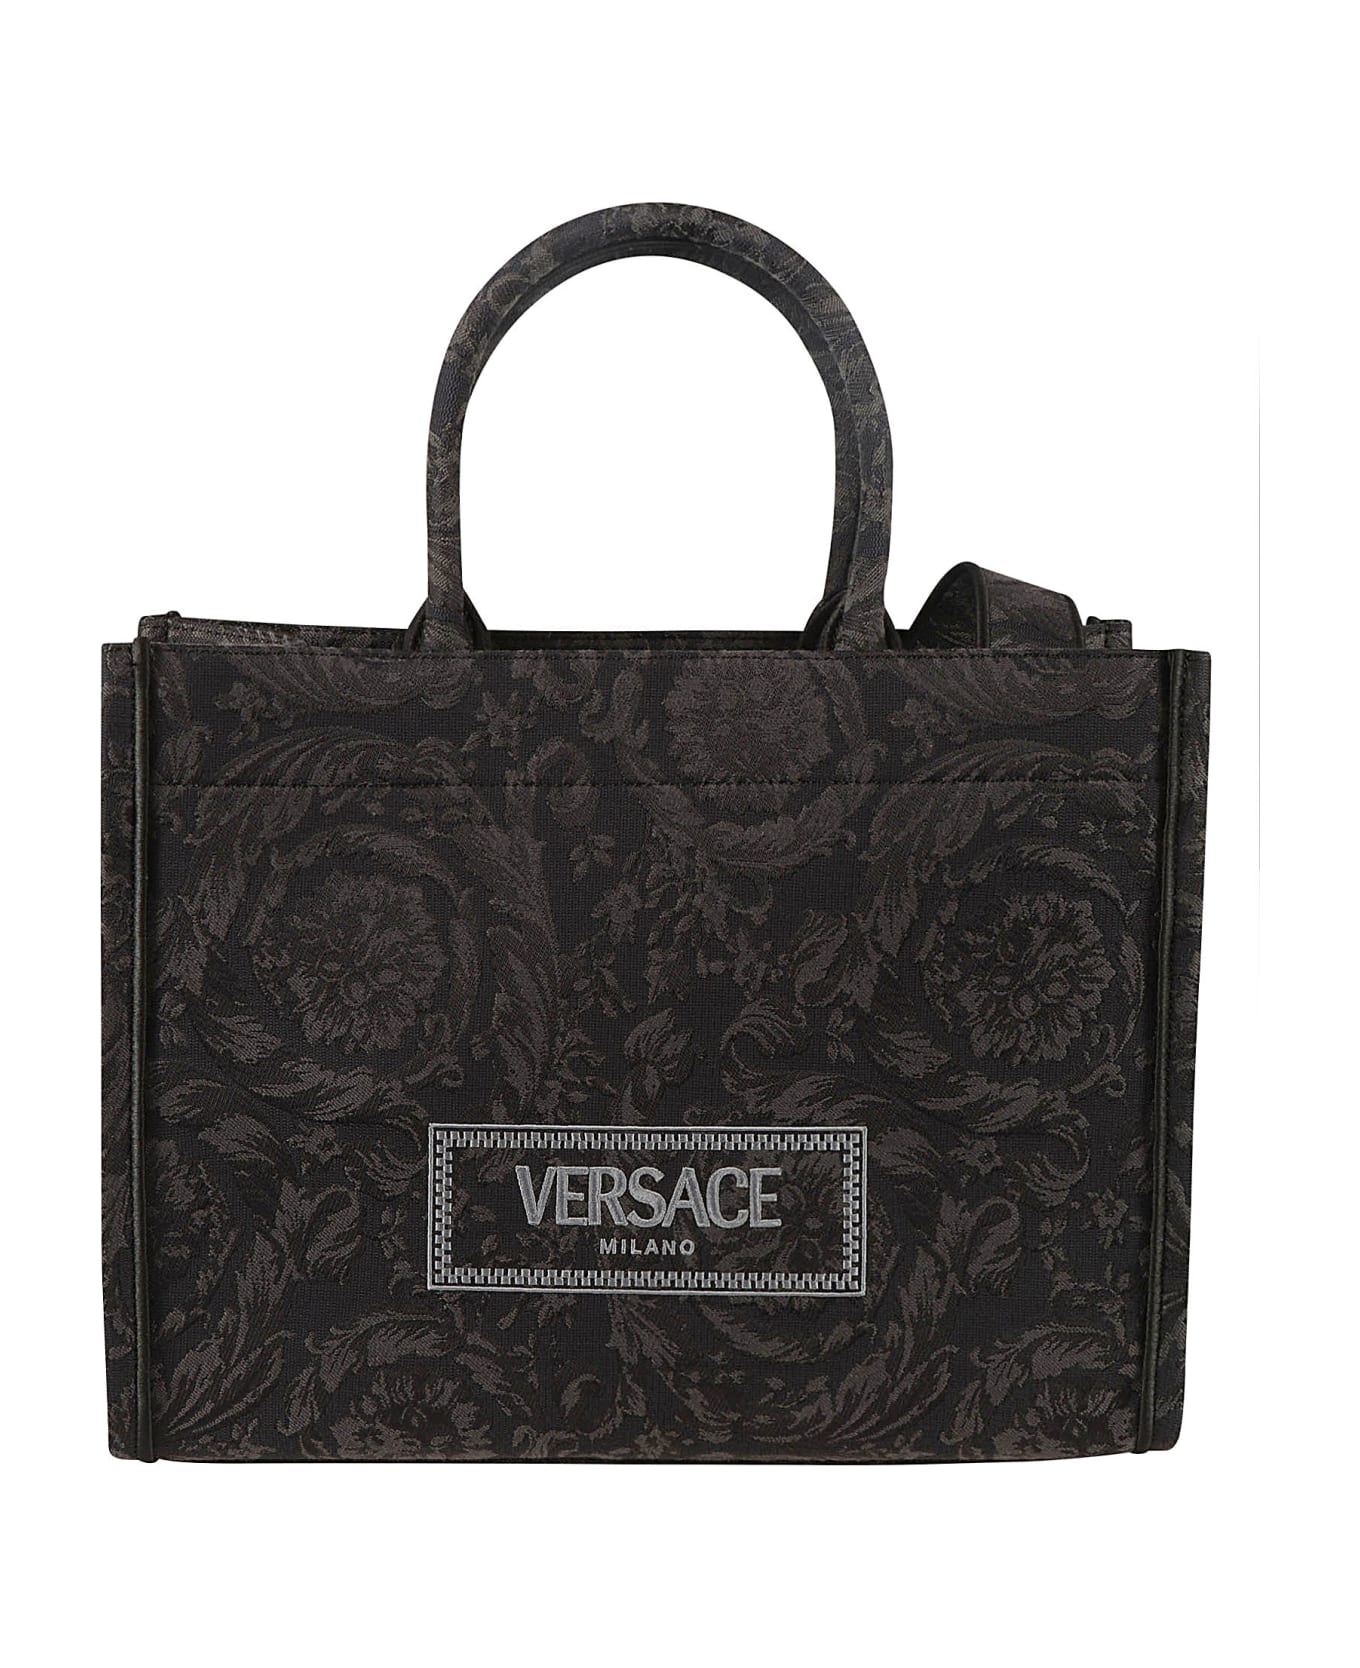 Versace Large Jacquard Embroidered Tote - Black/Versace Gold